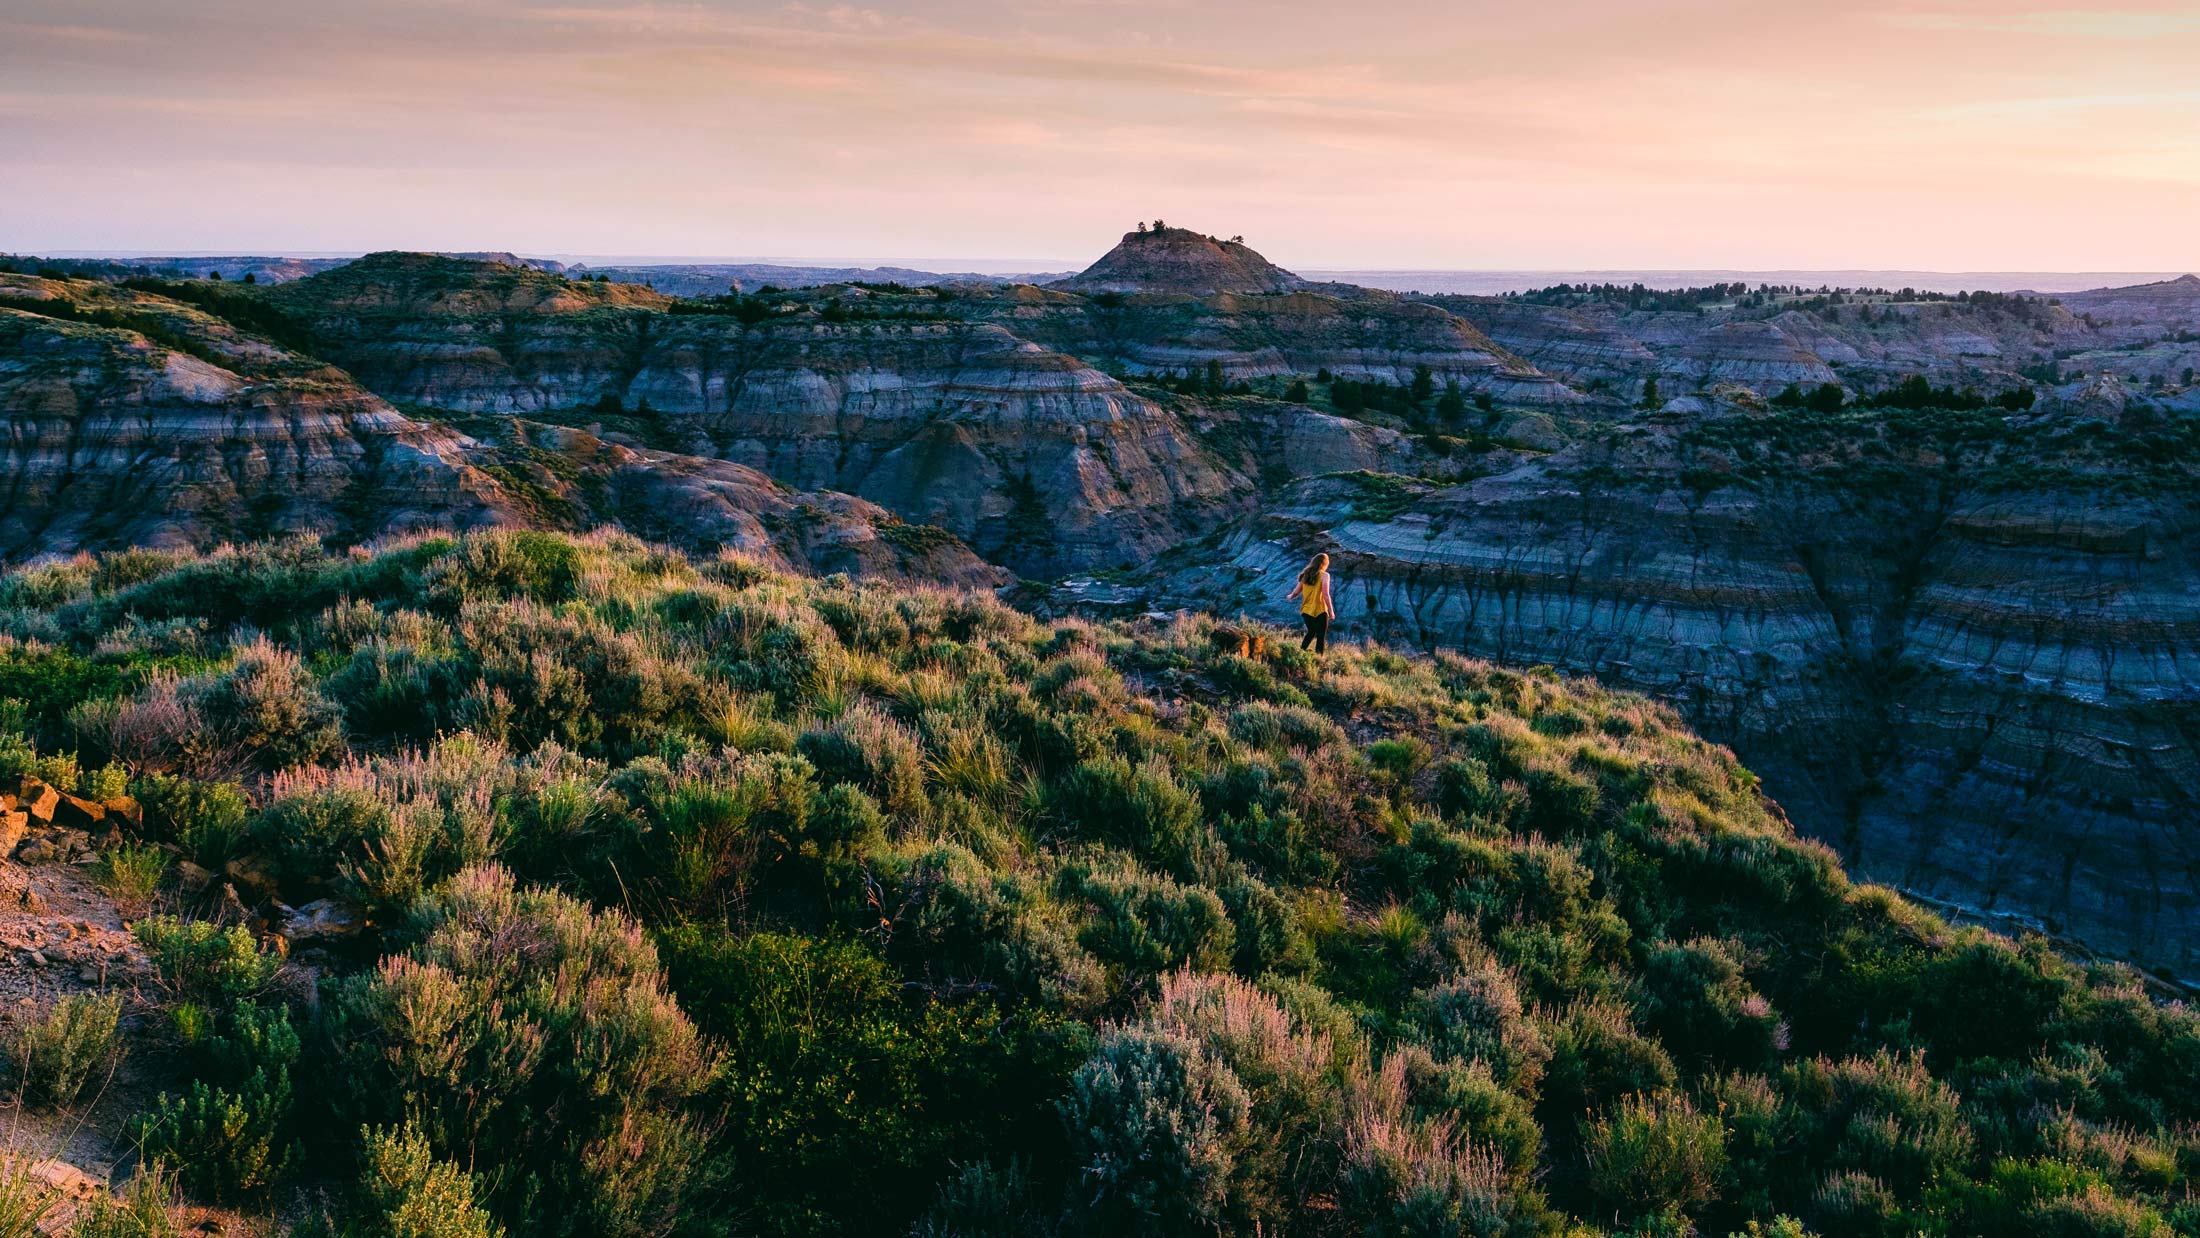 Southeast Montana’s Big, Open Spaces are the Perfect Place for an Escape: Part II